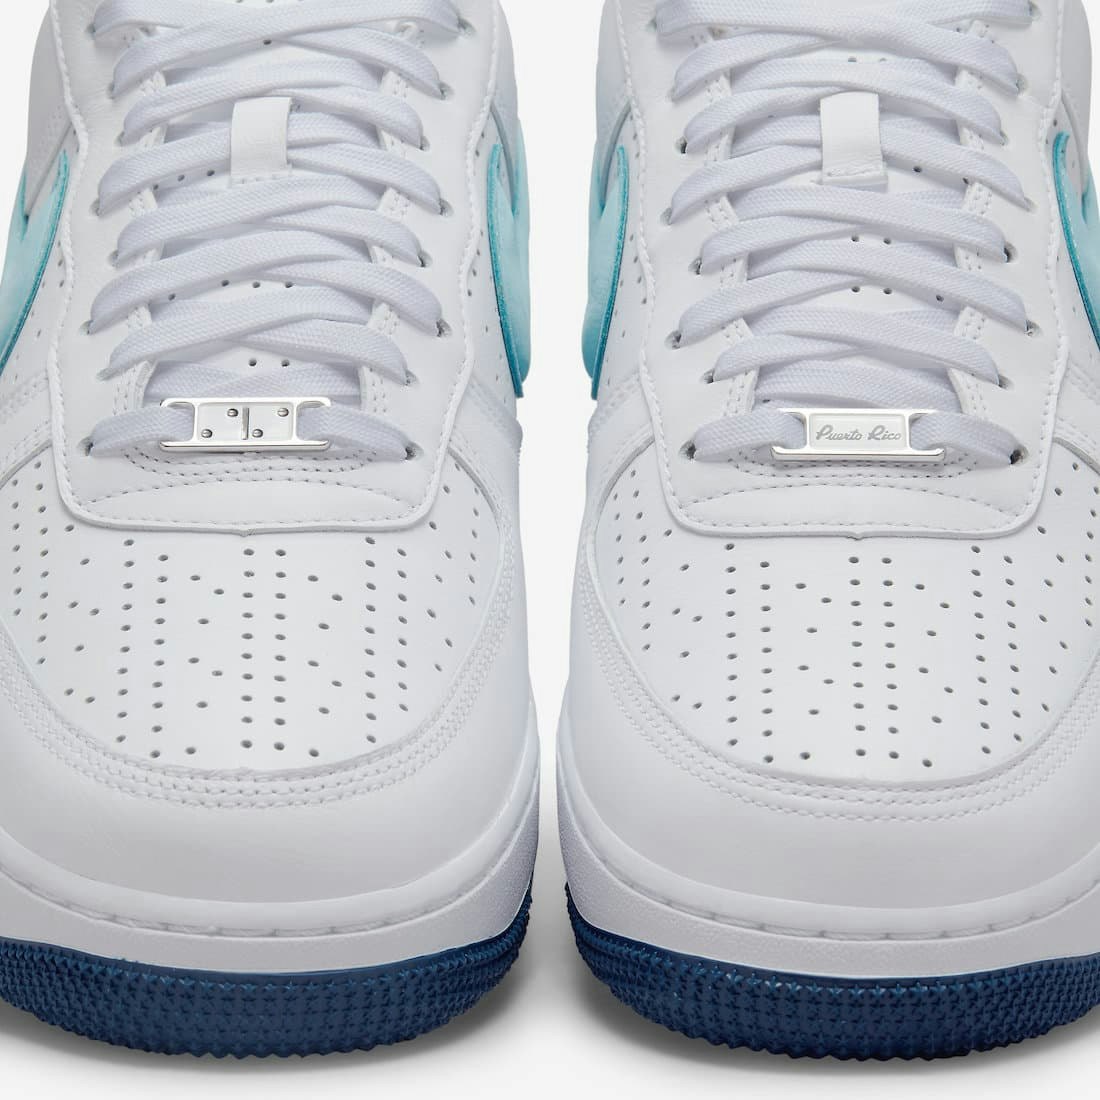 Nike Air Force 1 Low "Puerto Rico"